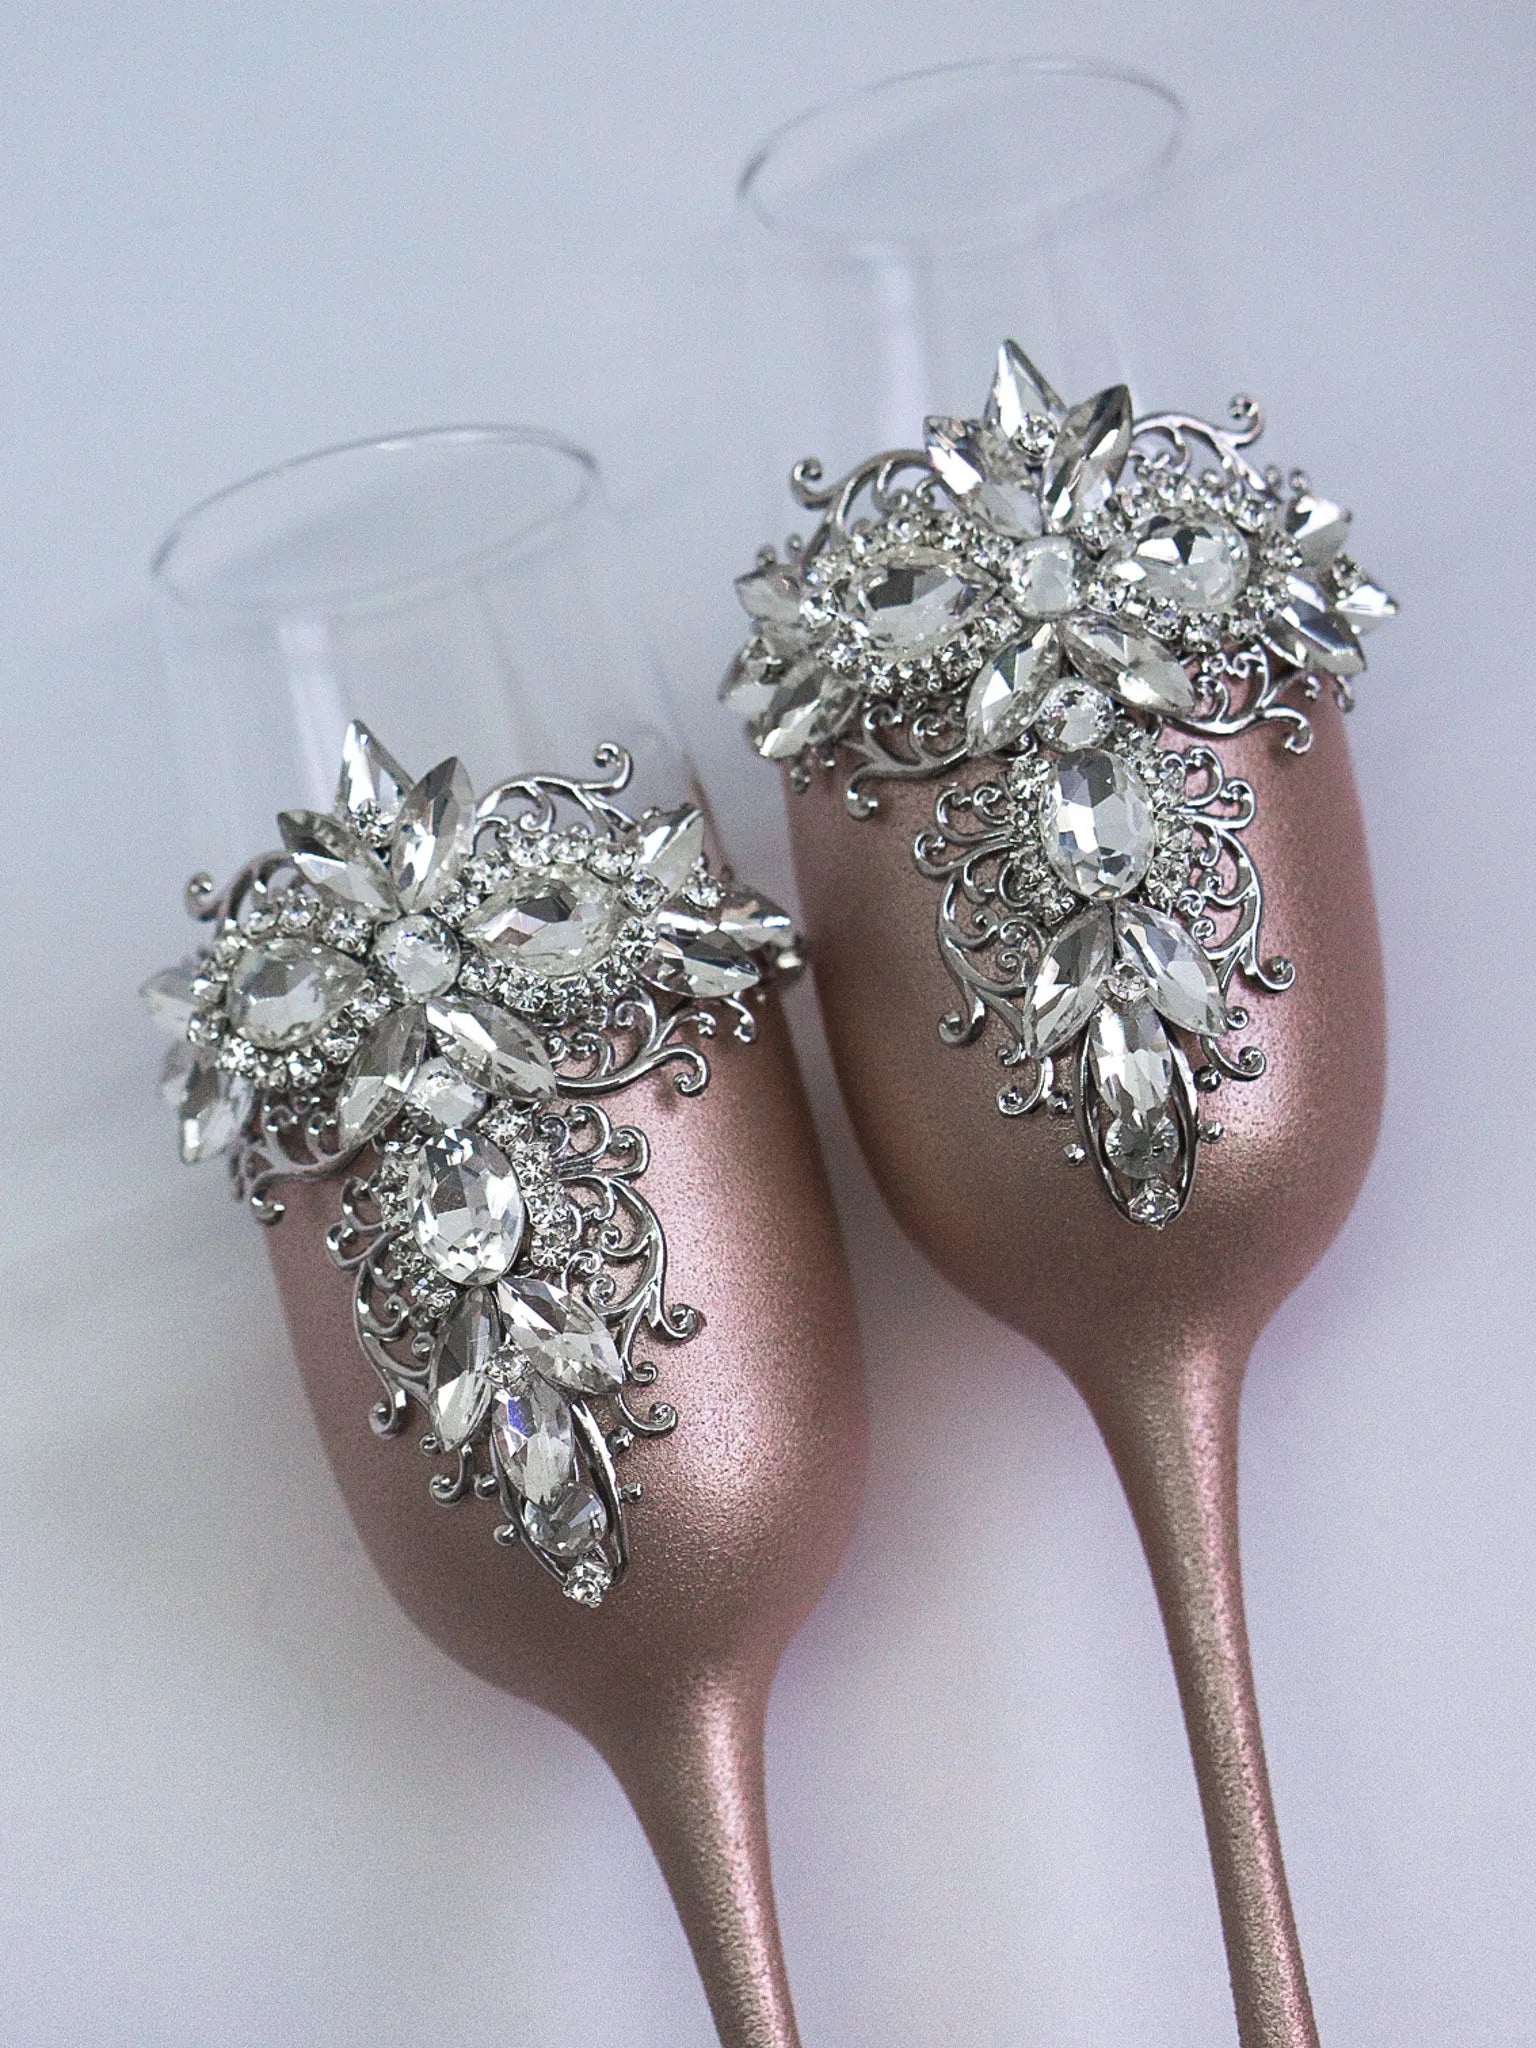 Engraved silver and rose gold champagne glasses